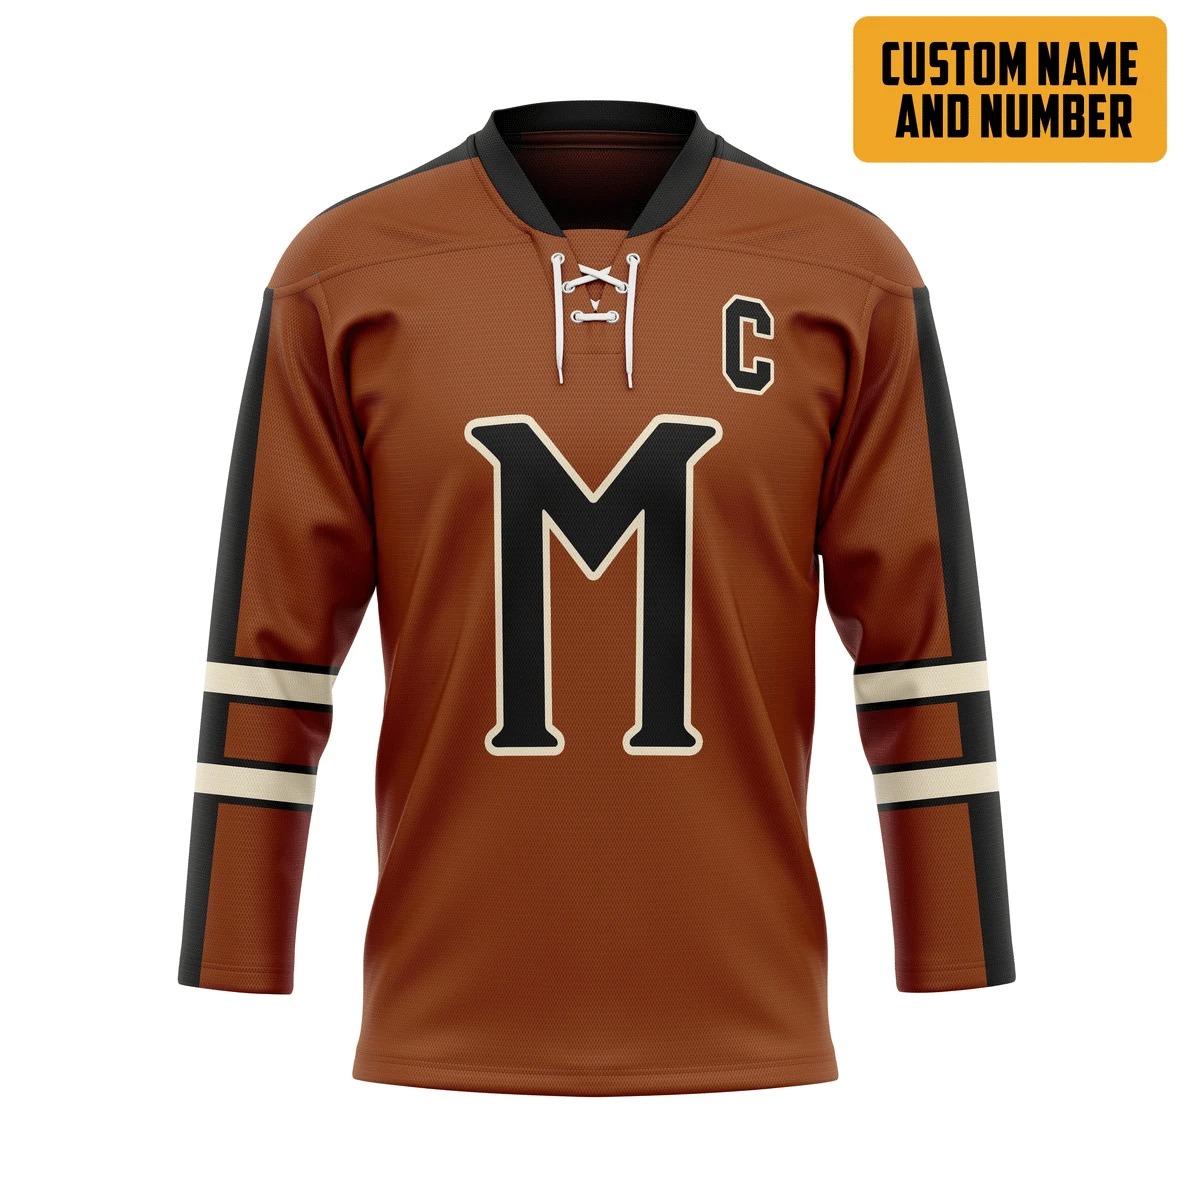 Choosing a hockey jersey is not as difficult as you think. 56